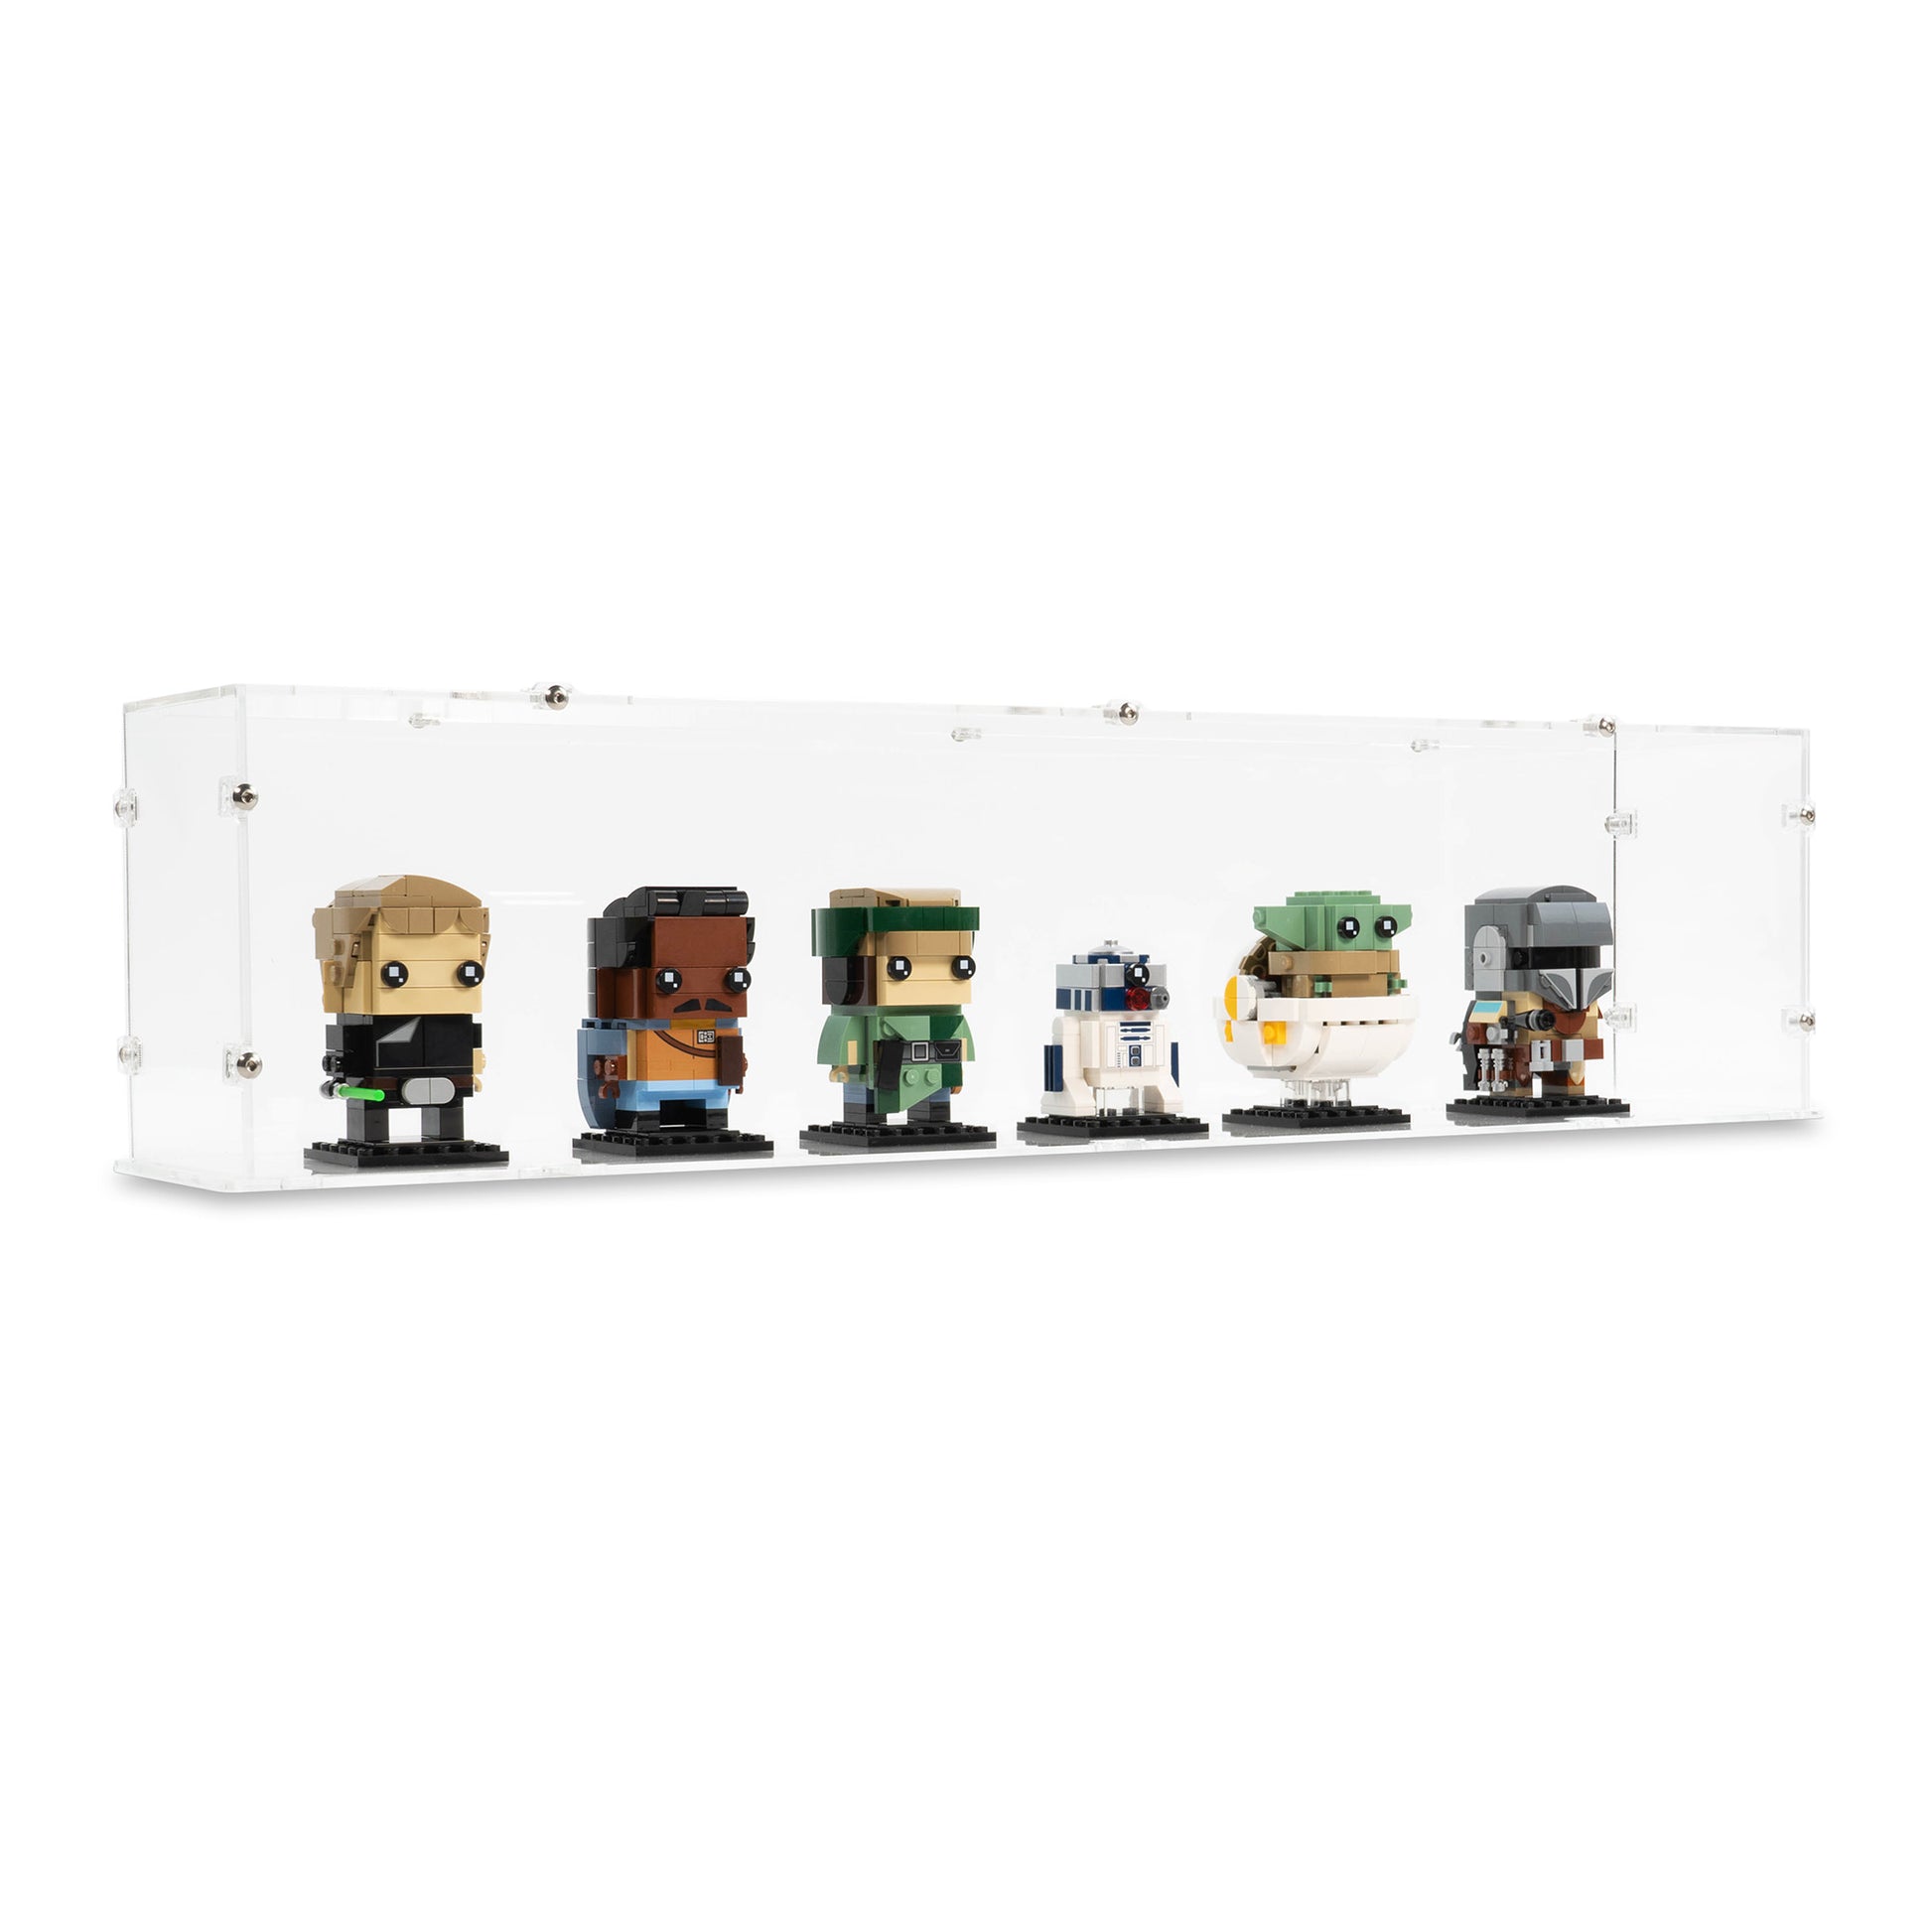 Angled view of 6x LEGO BrickHeadz Display Case with a Clear Base.